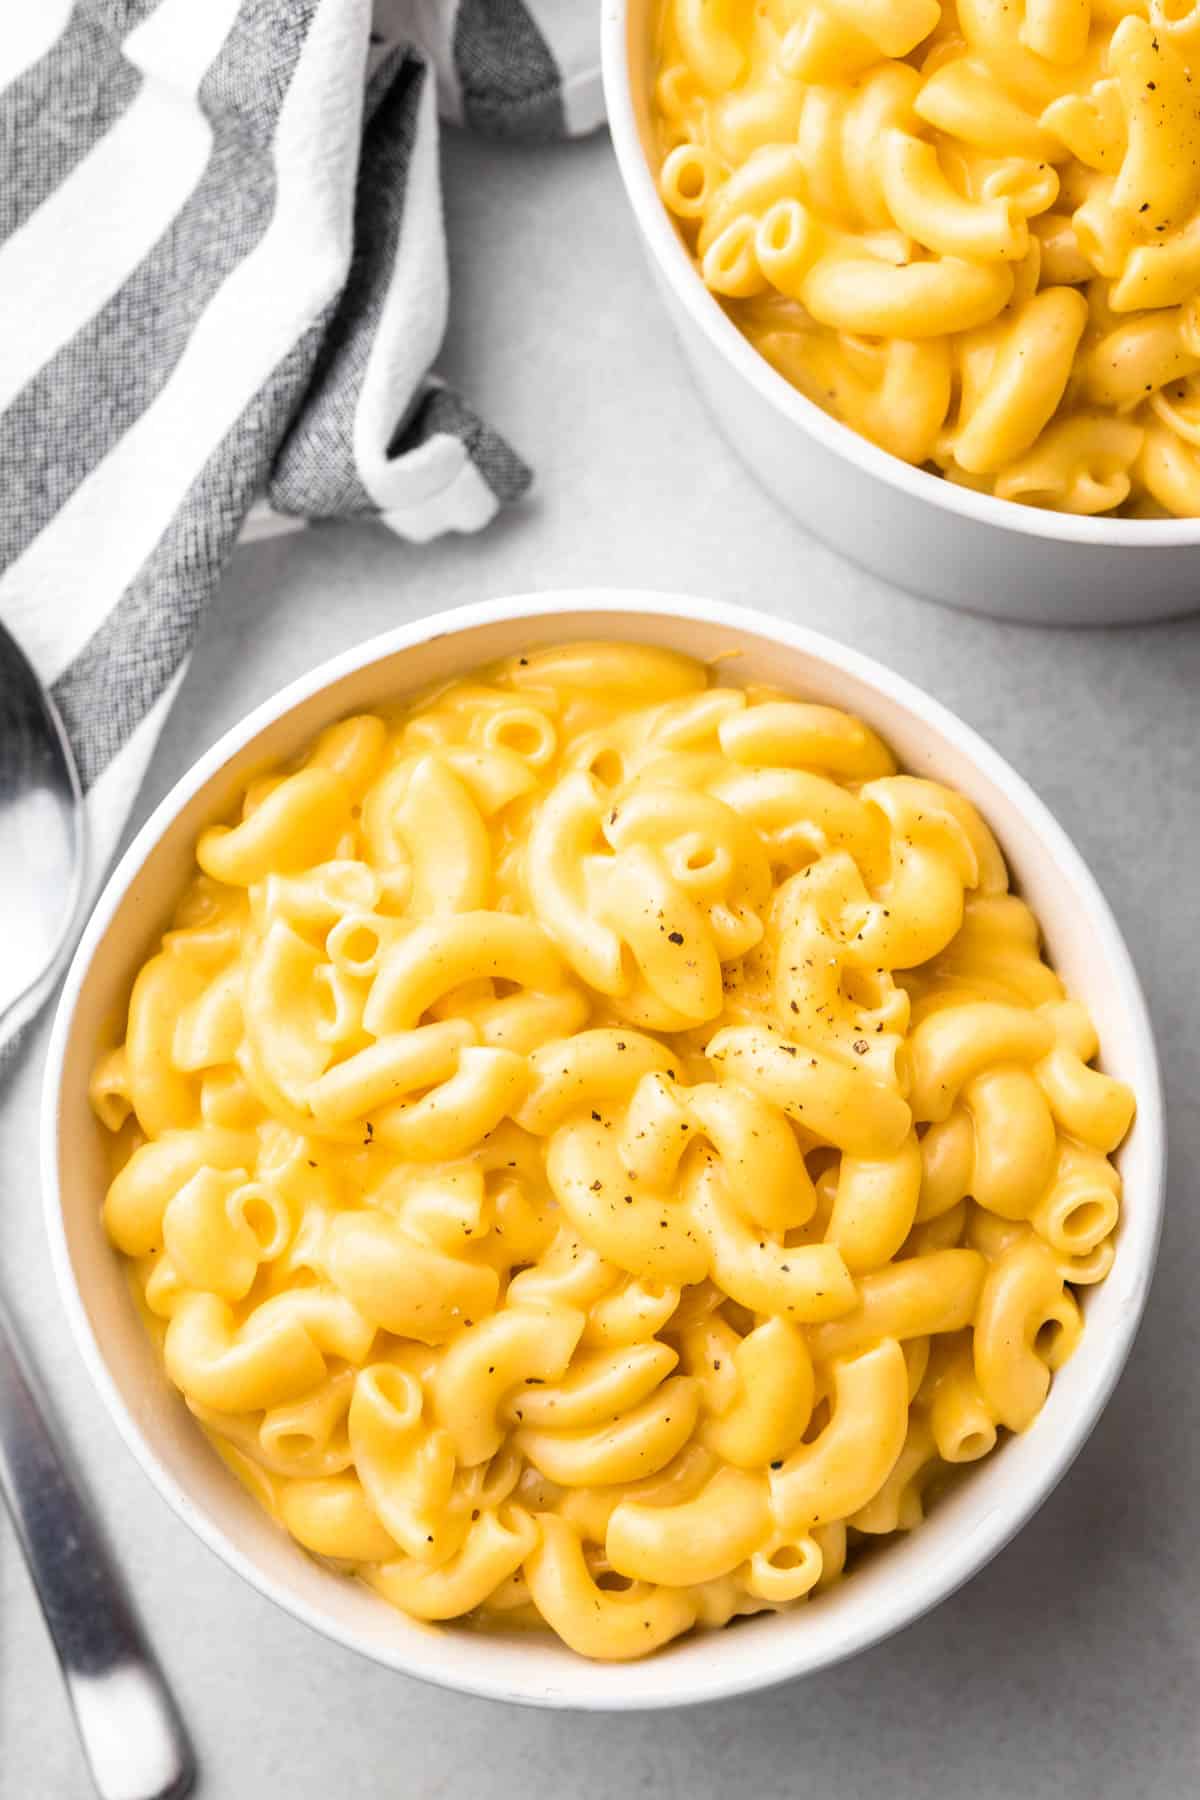 Mac and cheese in a white bowl with spoons and a cloth